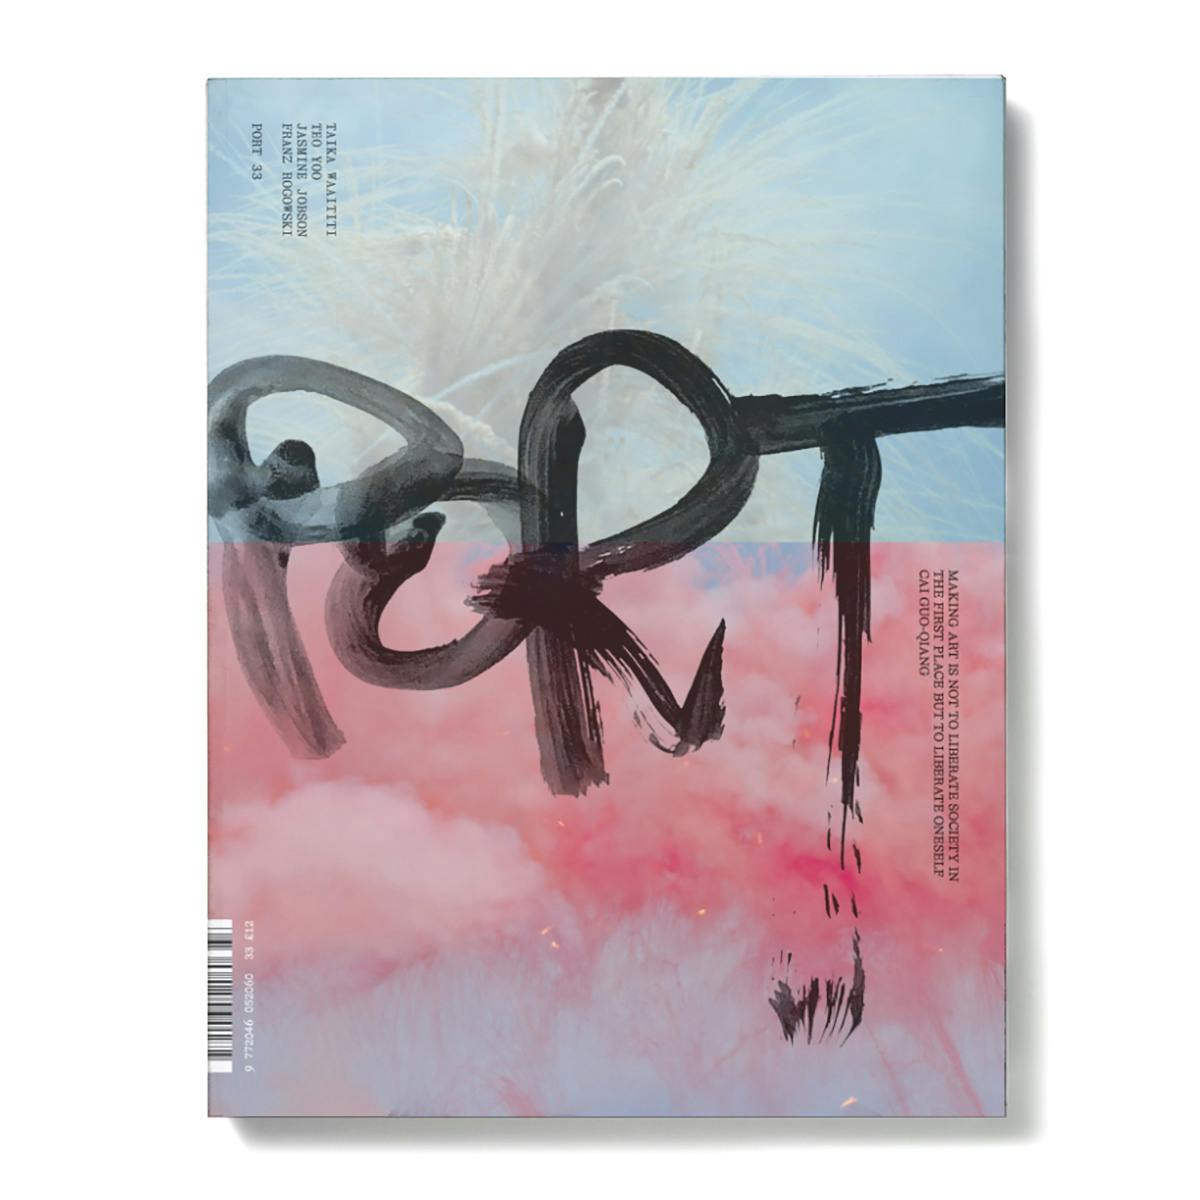 Photo of the cover of Port magazine with the masthead handwritten in thick black brushstrokes over a pink and blue abstract image